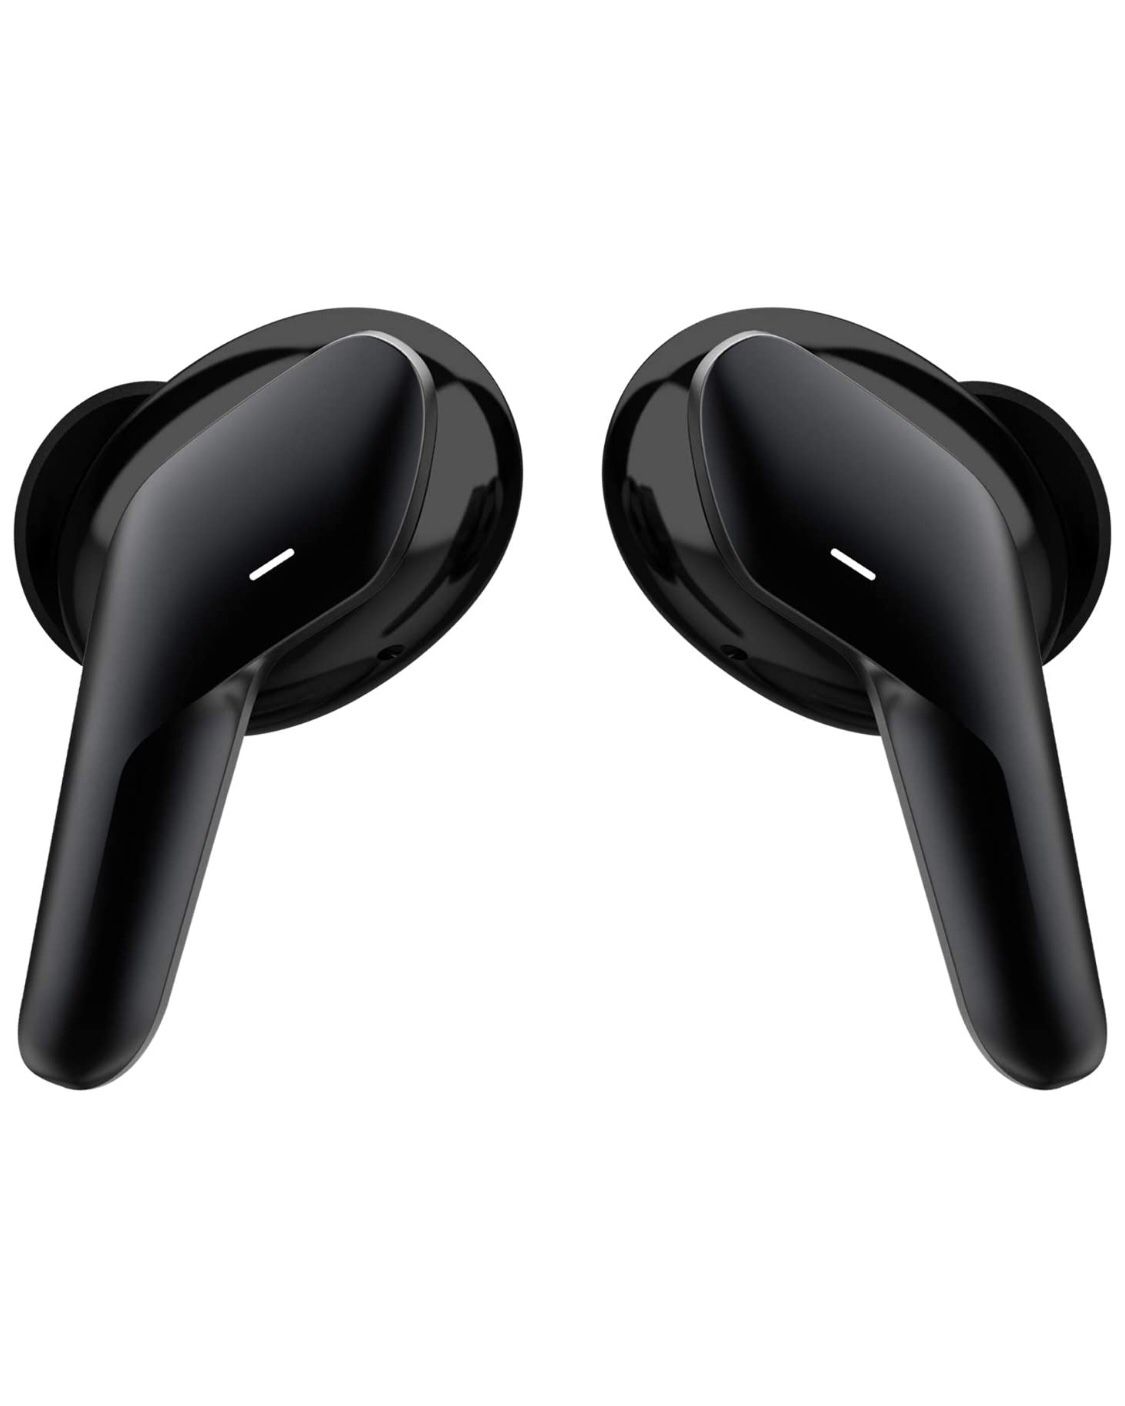 Brand new! Wireless Earbuds Headphones Bluetooth 5.0 in Ear with True Wireless Stereo Mic Headset Charging Case